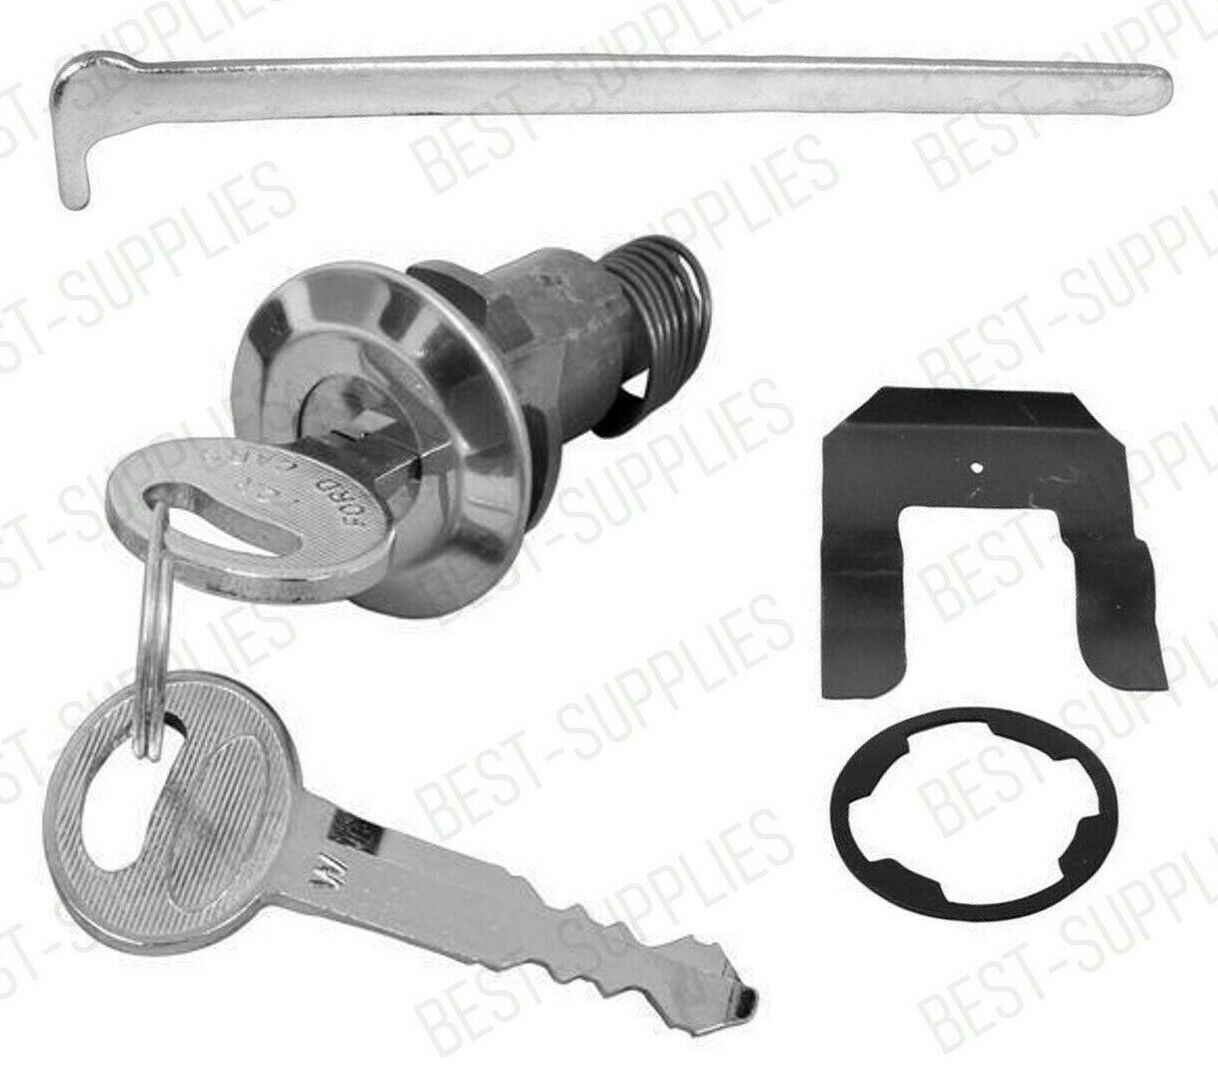 1967 - 1973 Ford Mustang Trunk Lock Cylinder Kit with Keys CL-1552